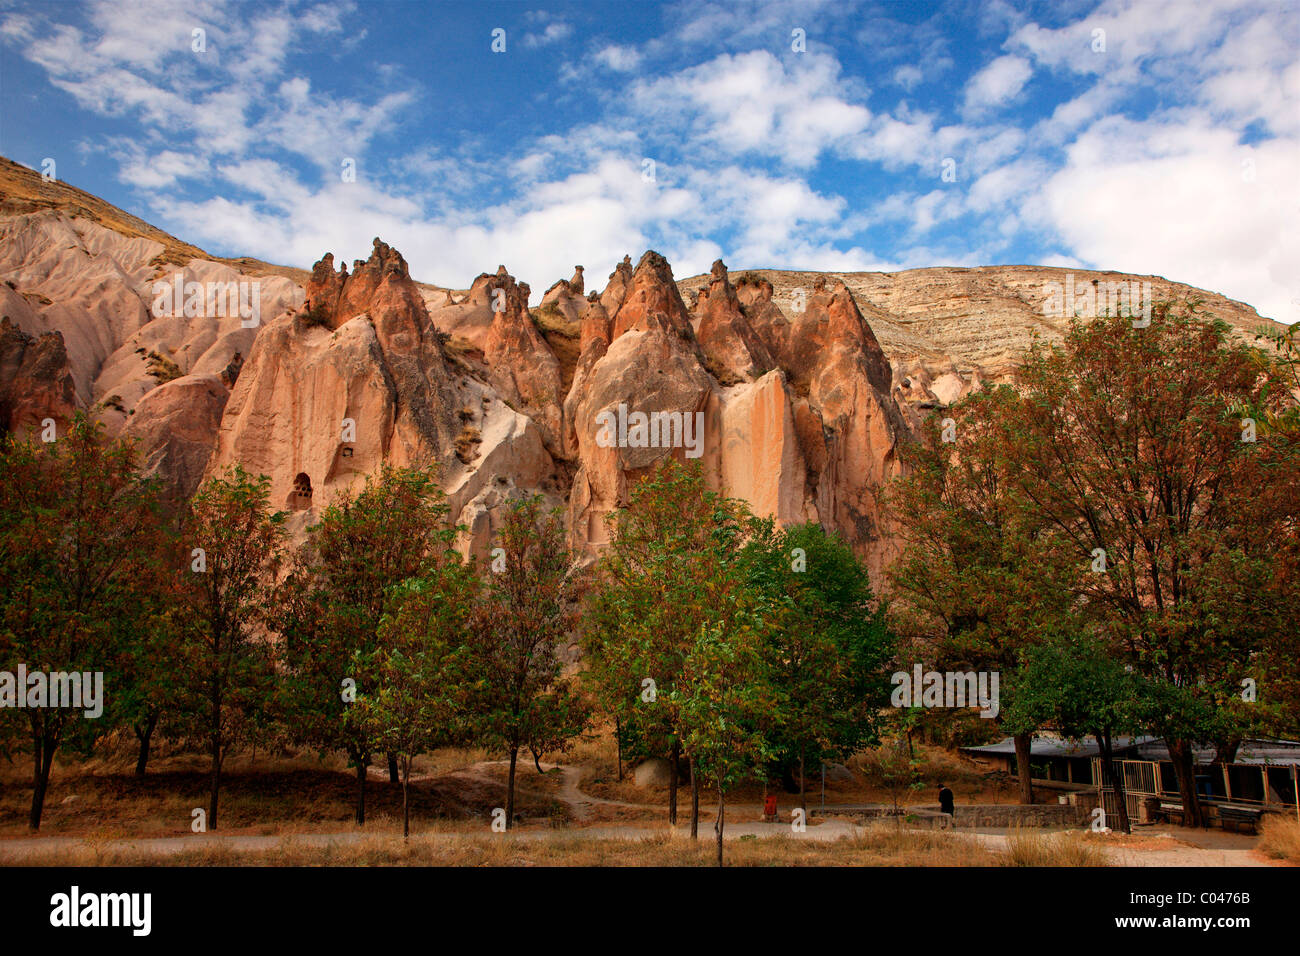 The entrance to the National Park of Zelve Valley, Nevsehir, Cappadocia, Turkey Stock Photo